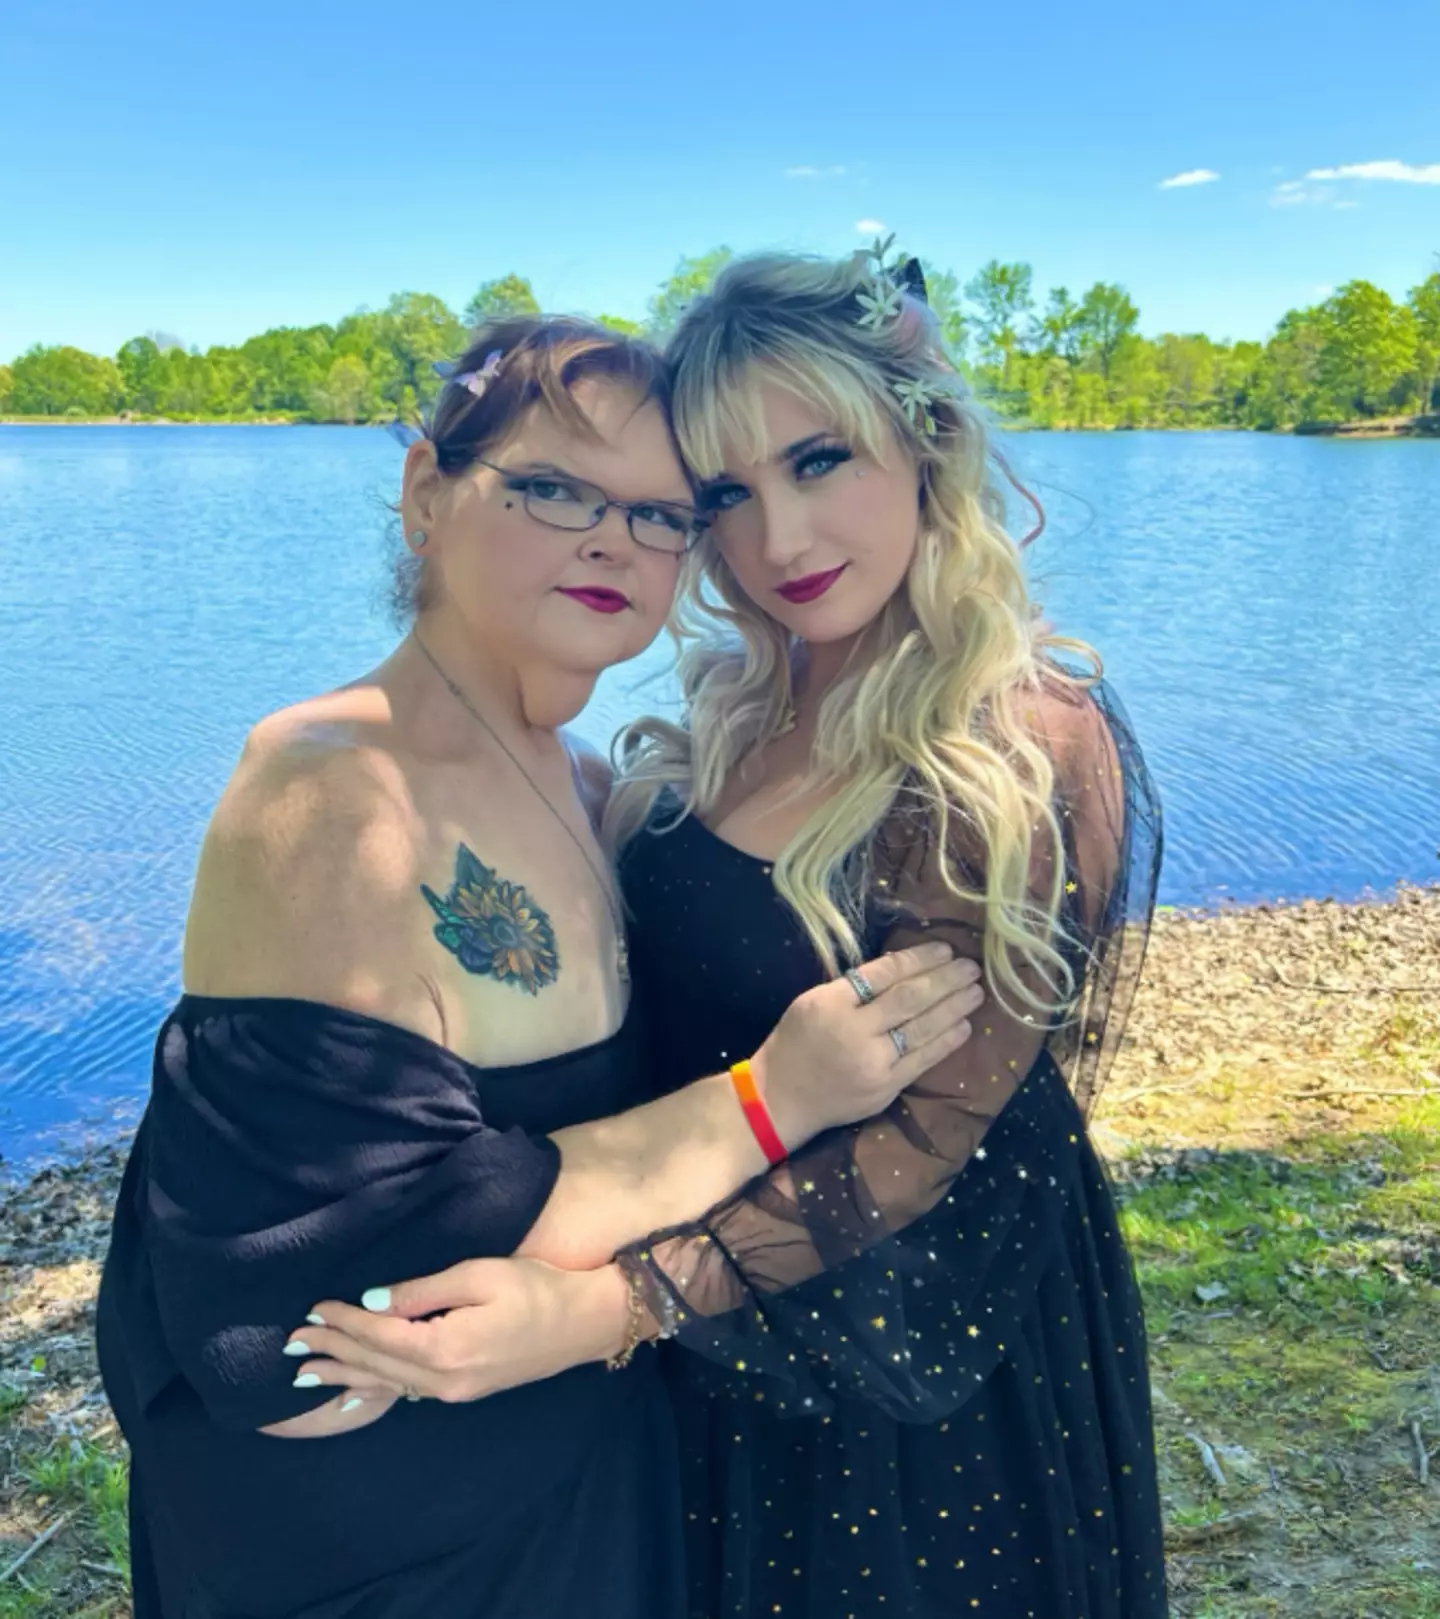 The 37-year-old was seen posing  with her friend and ‘psychic’ Haley Michelle in an Instagram post.(queentammy86/Instagram)